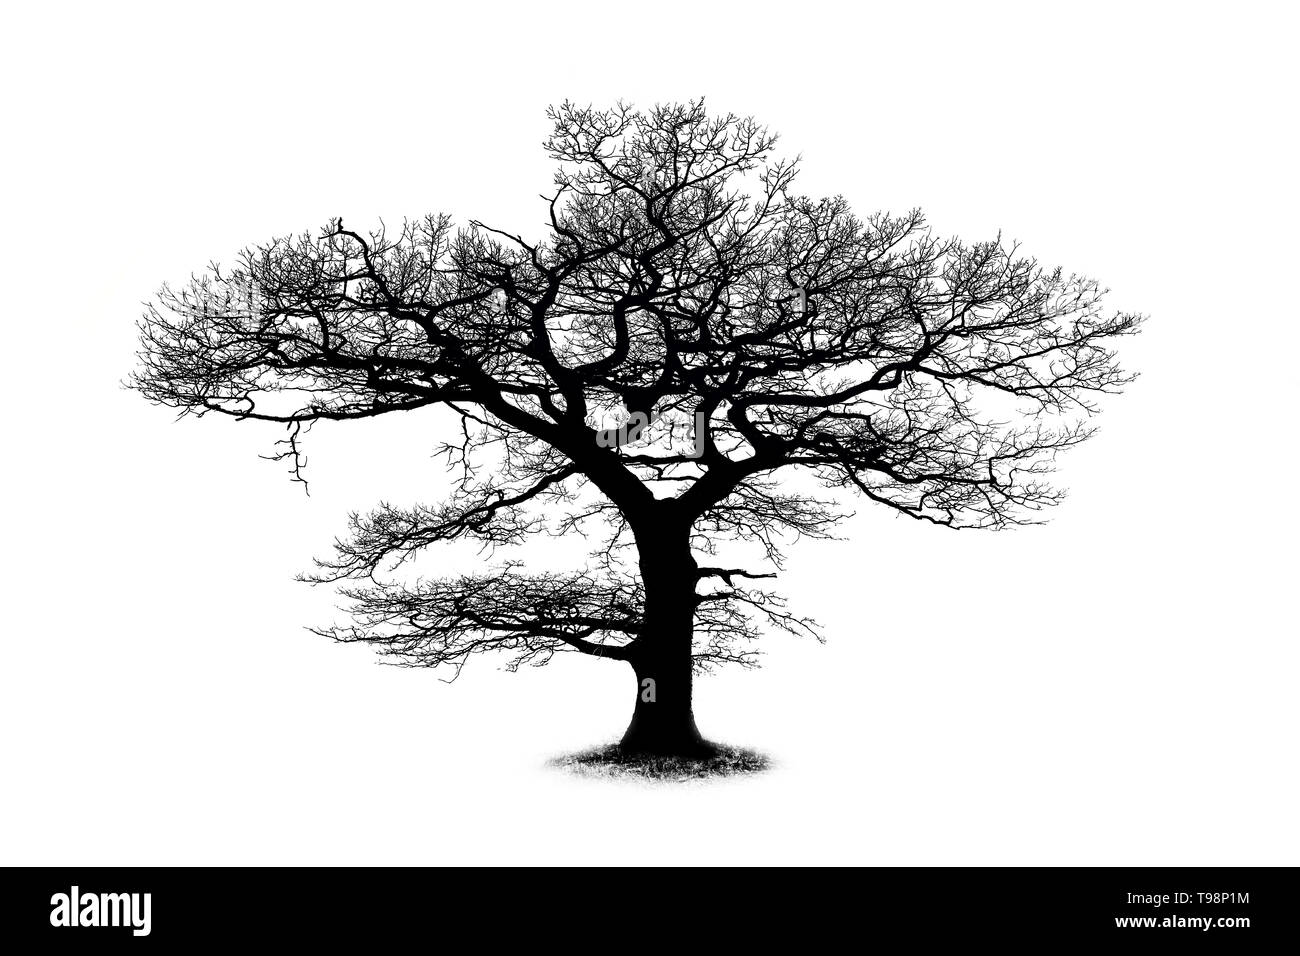 Oak tree silhouette isolated on white background with a beautiful curved branches Stock Photo